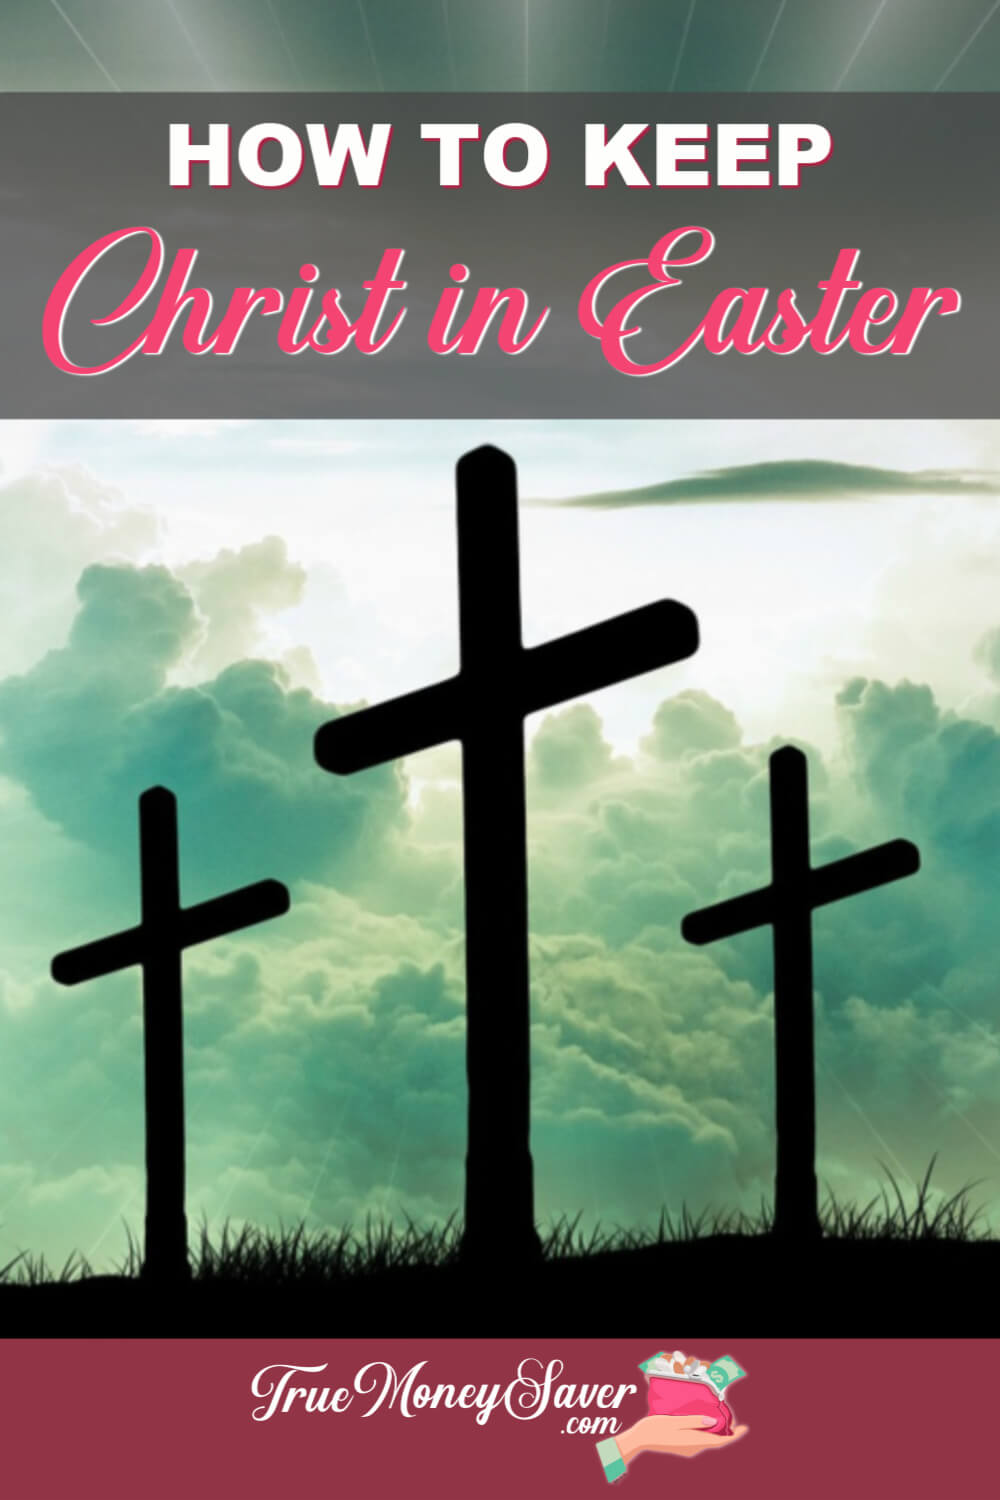 Planning Easter Activities & Traditions? Here Are Some Fun Christ-Centered Ones Too!